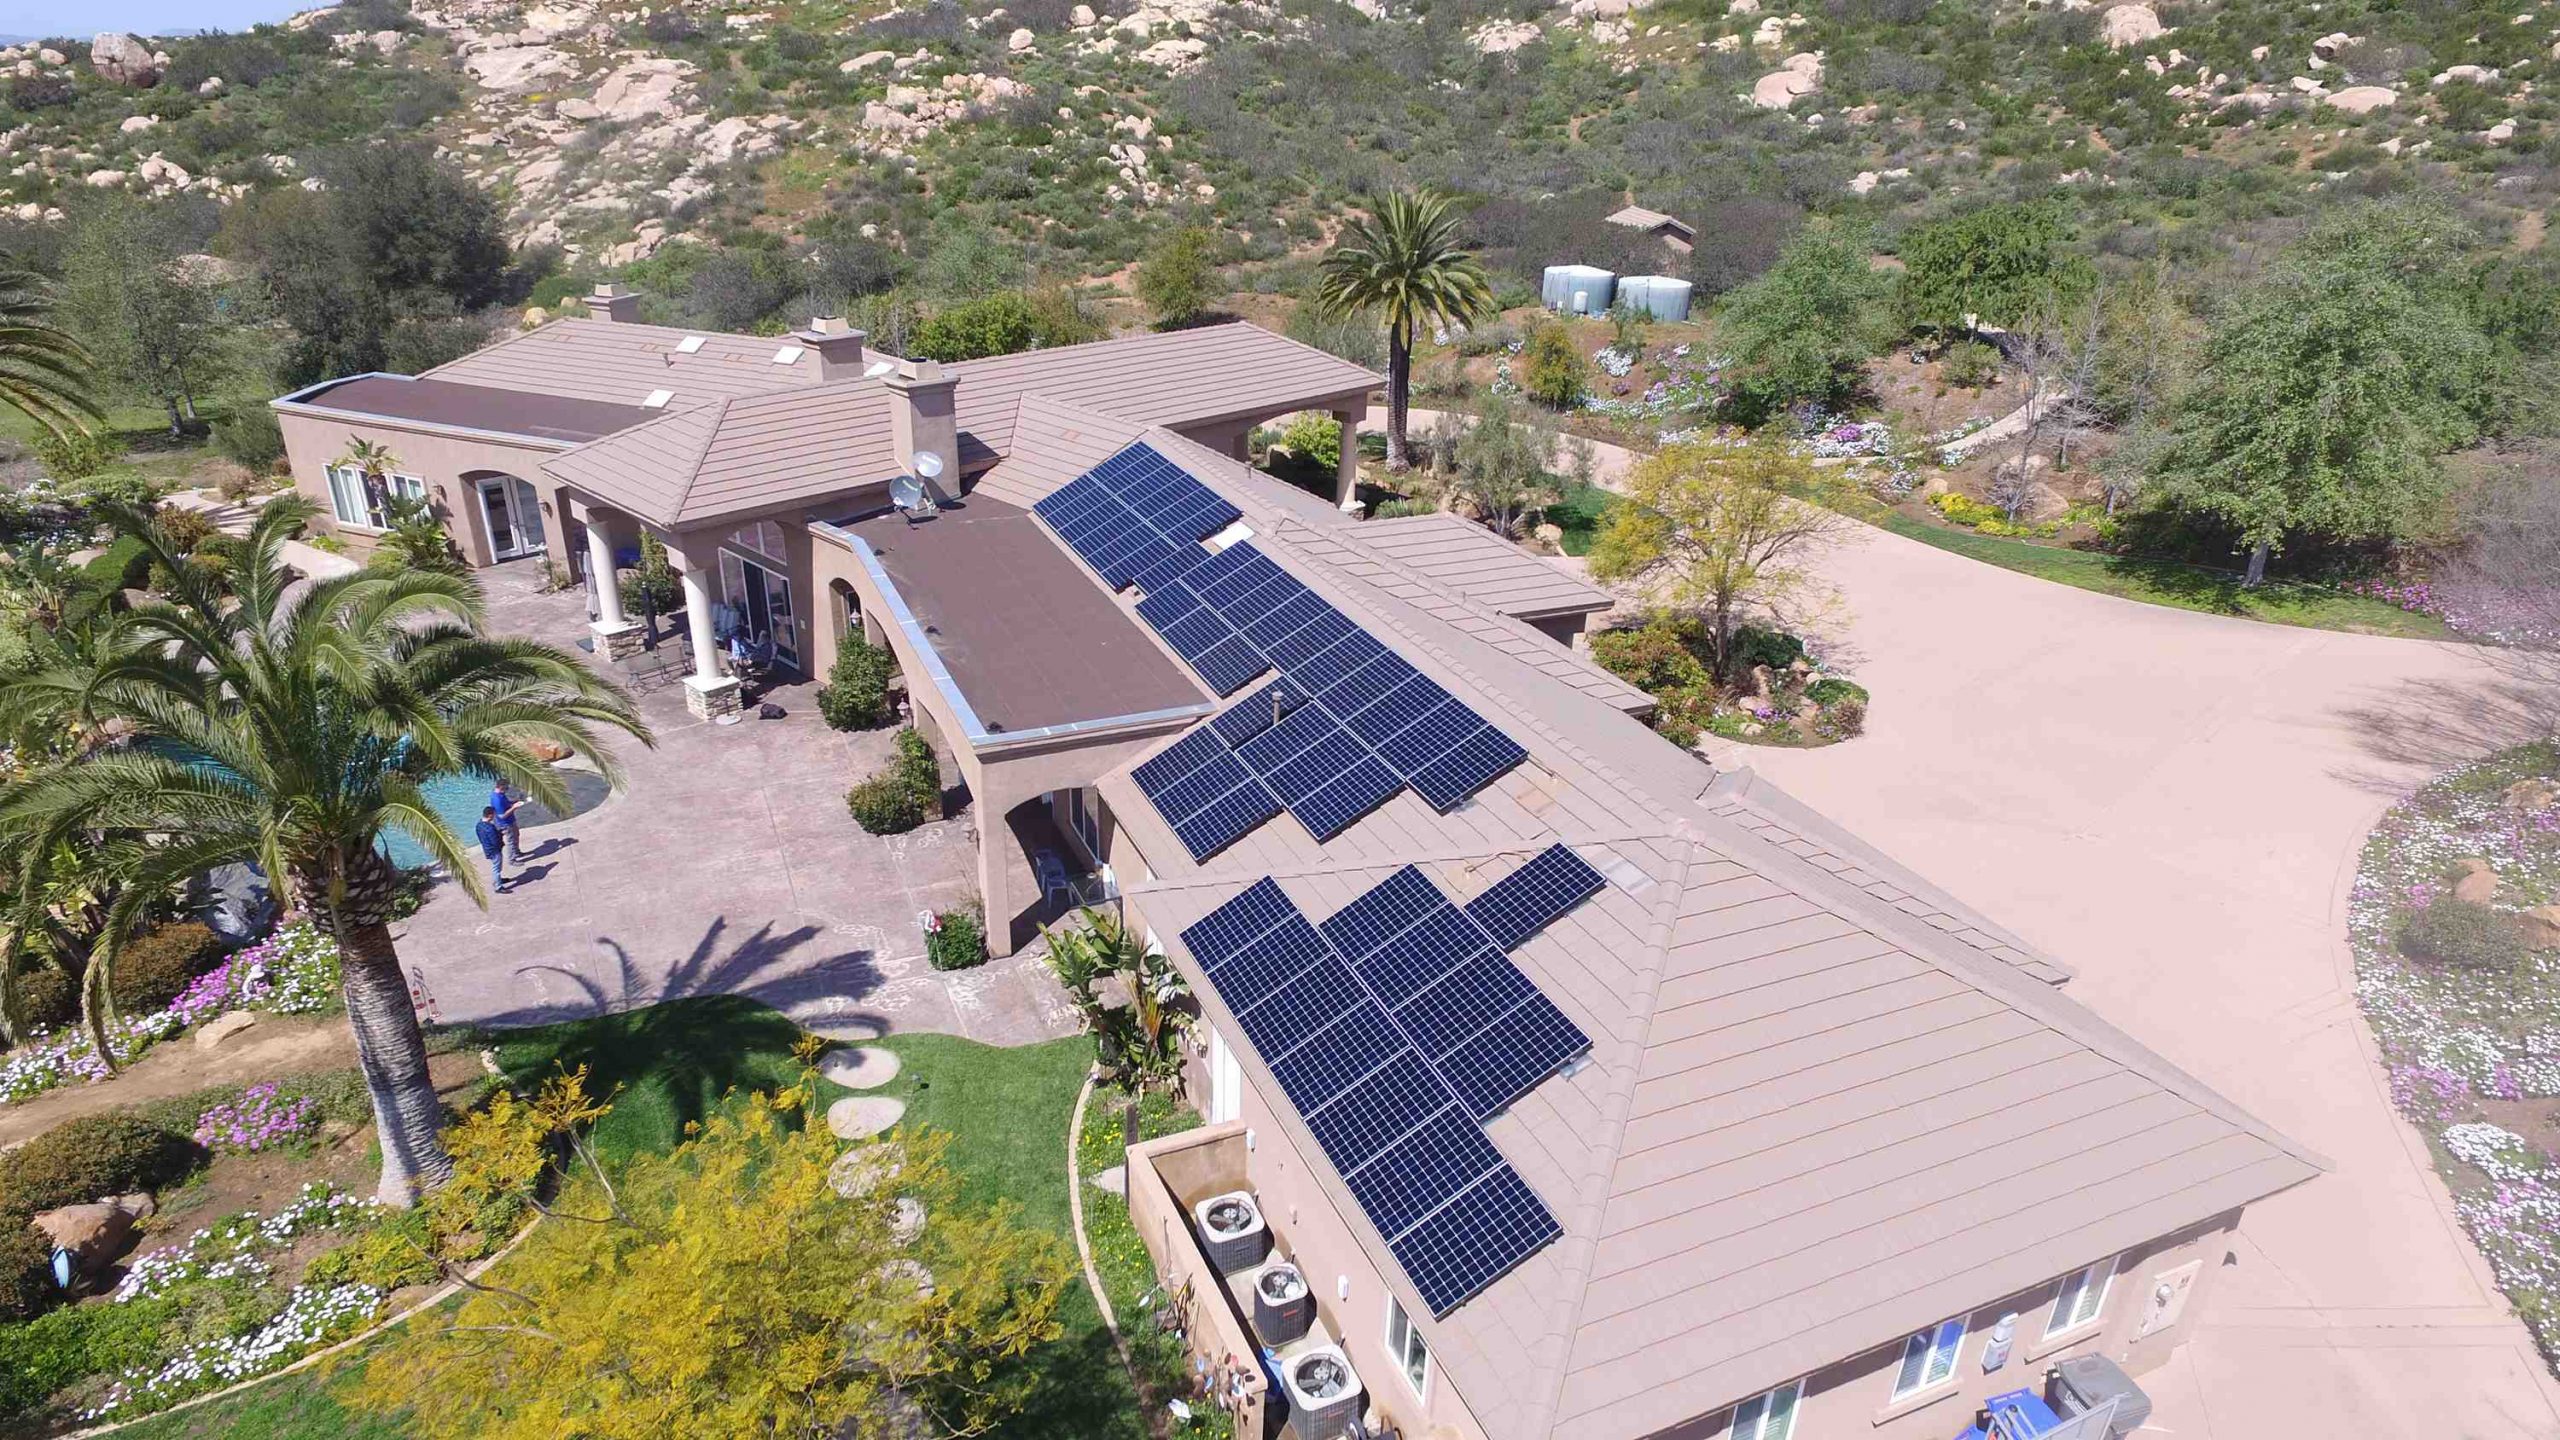 Does California have a solar tax credit 2021?